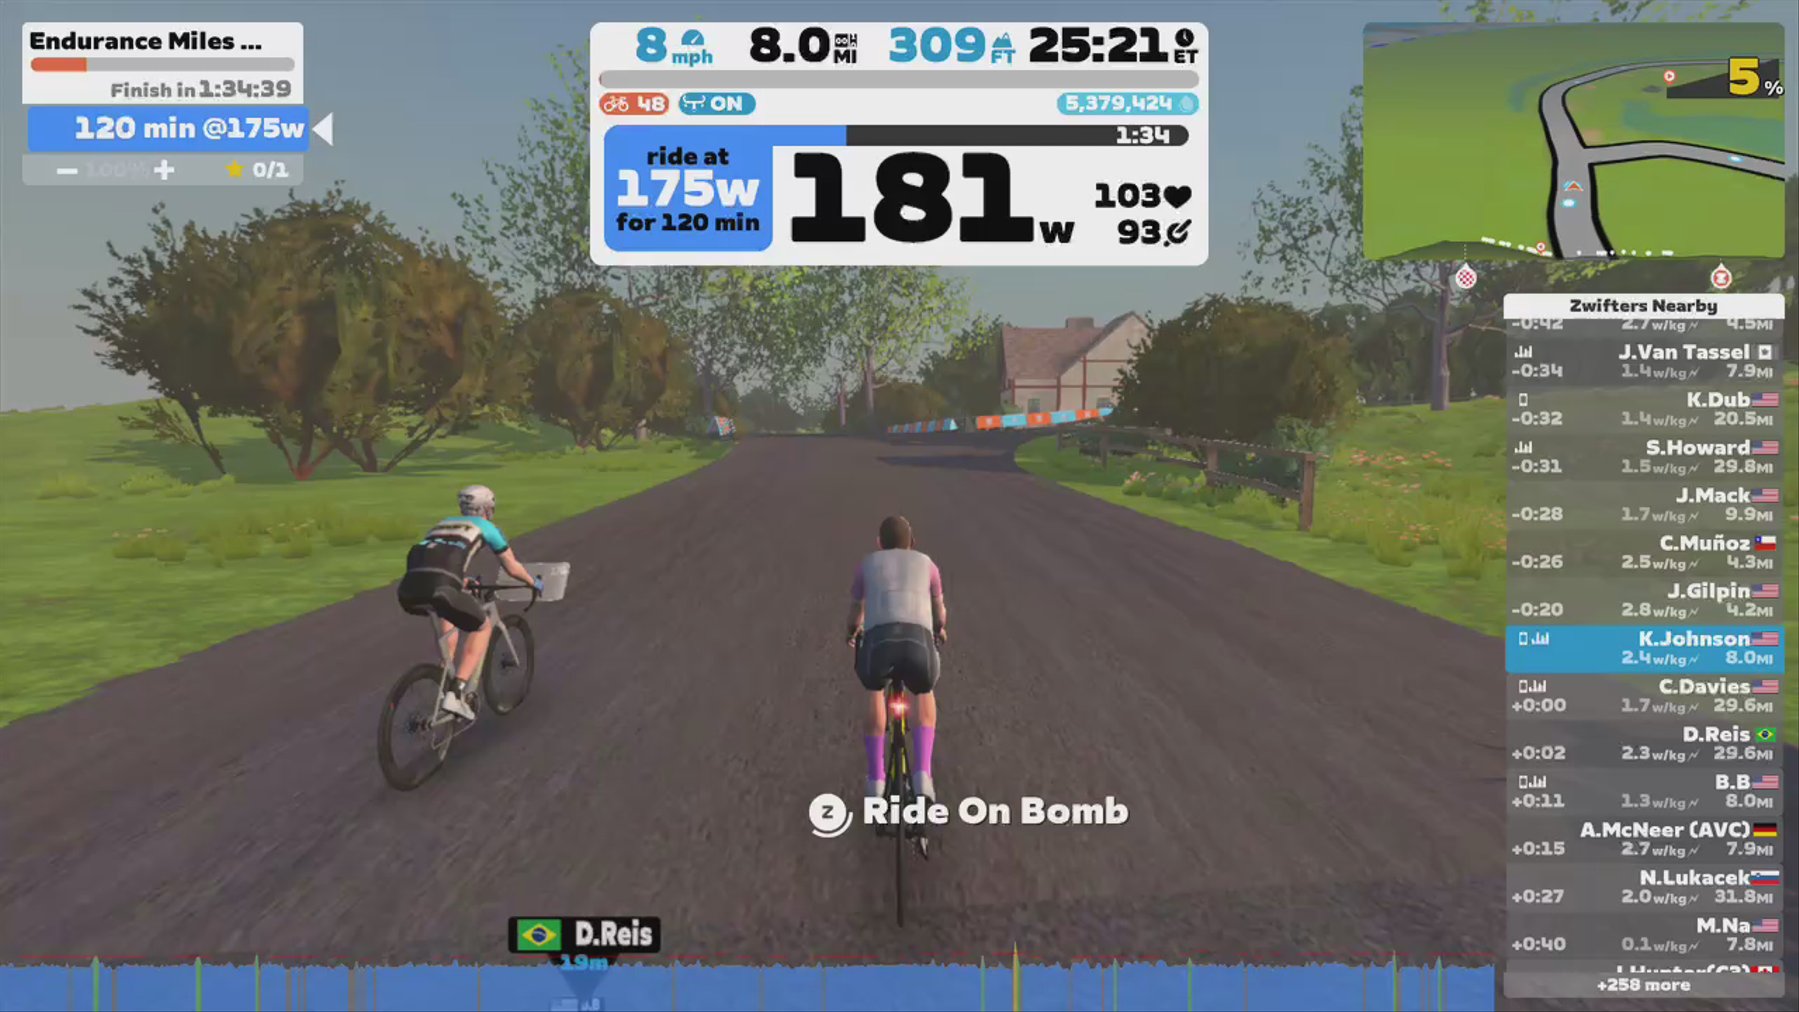 Zwift - Endurance Miles 1.00hrs in London